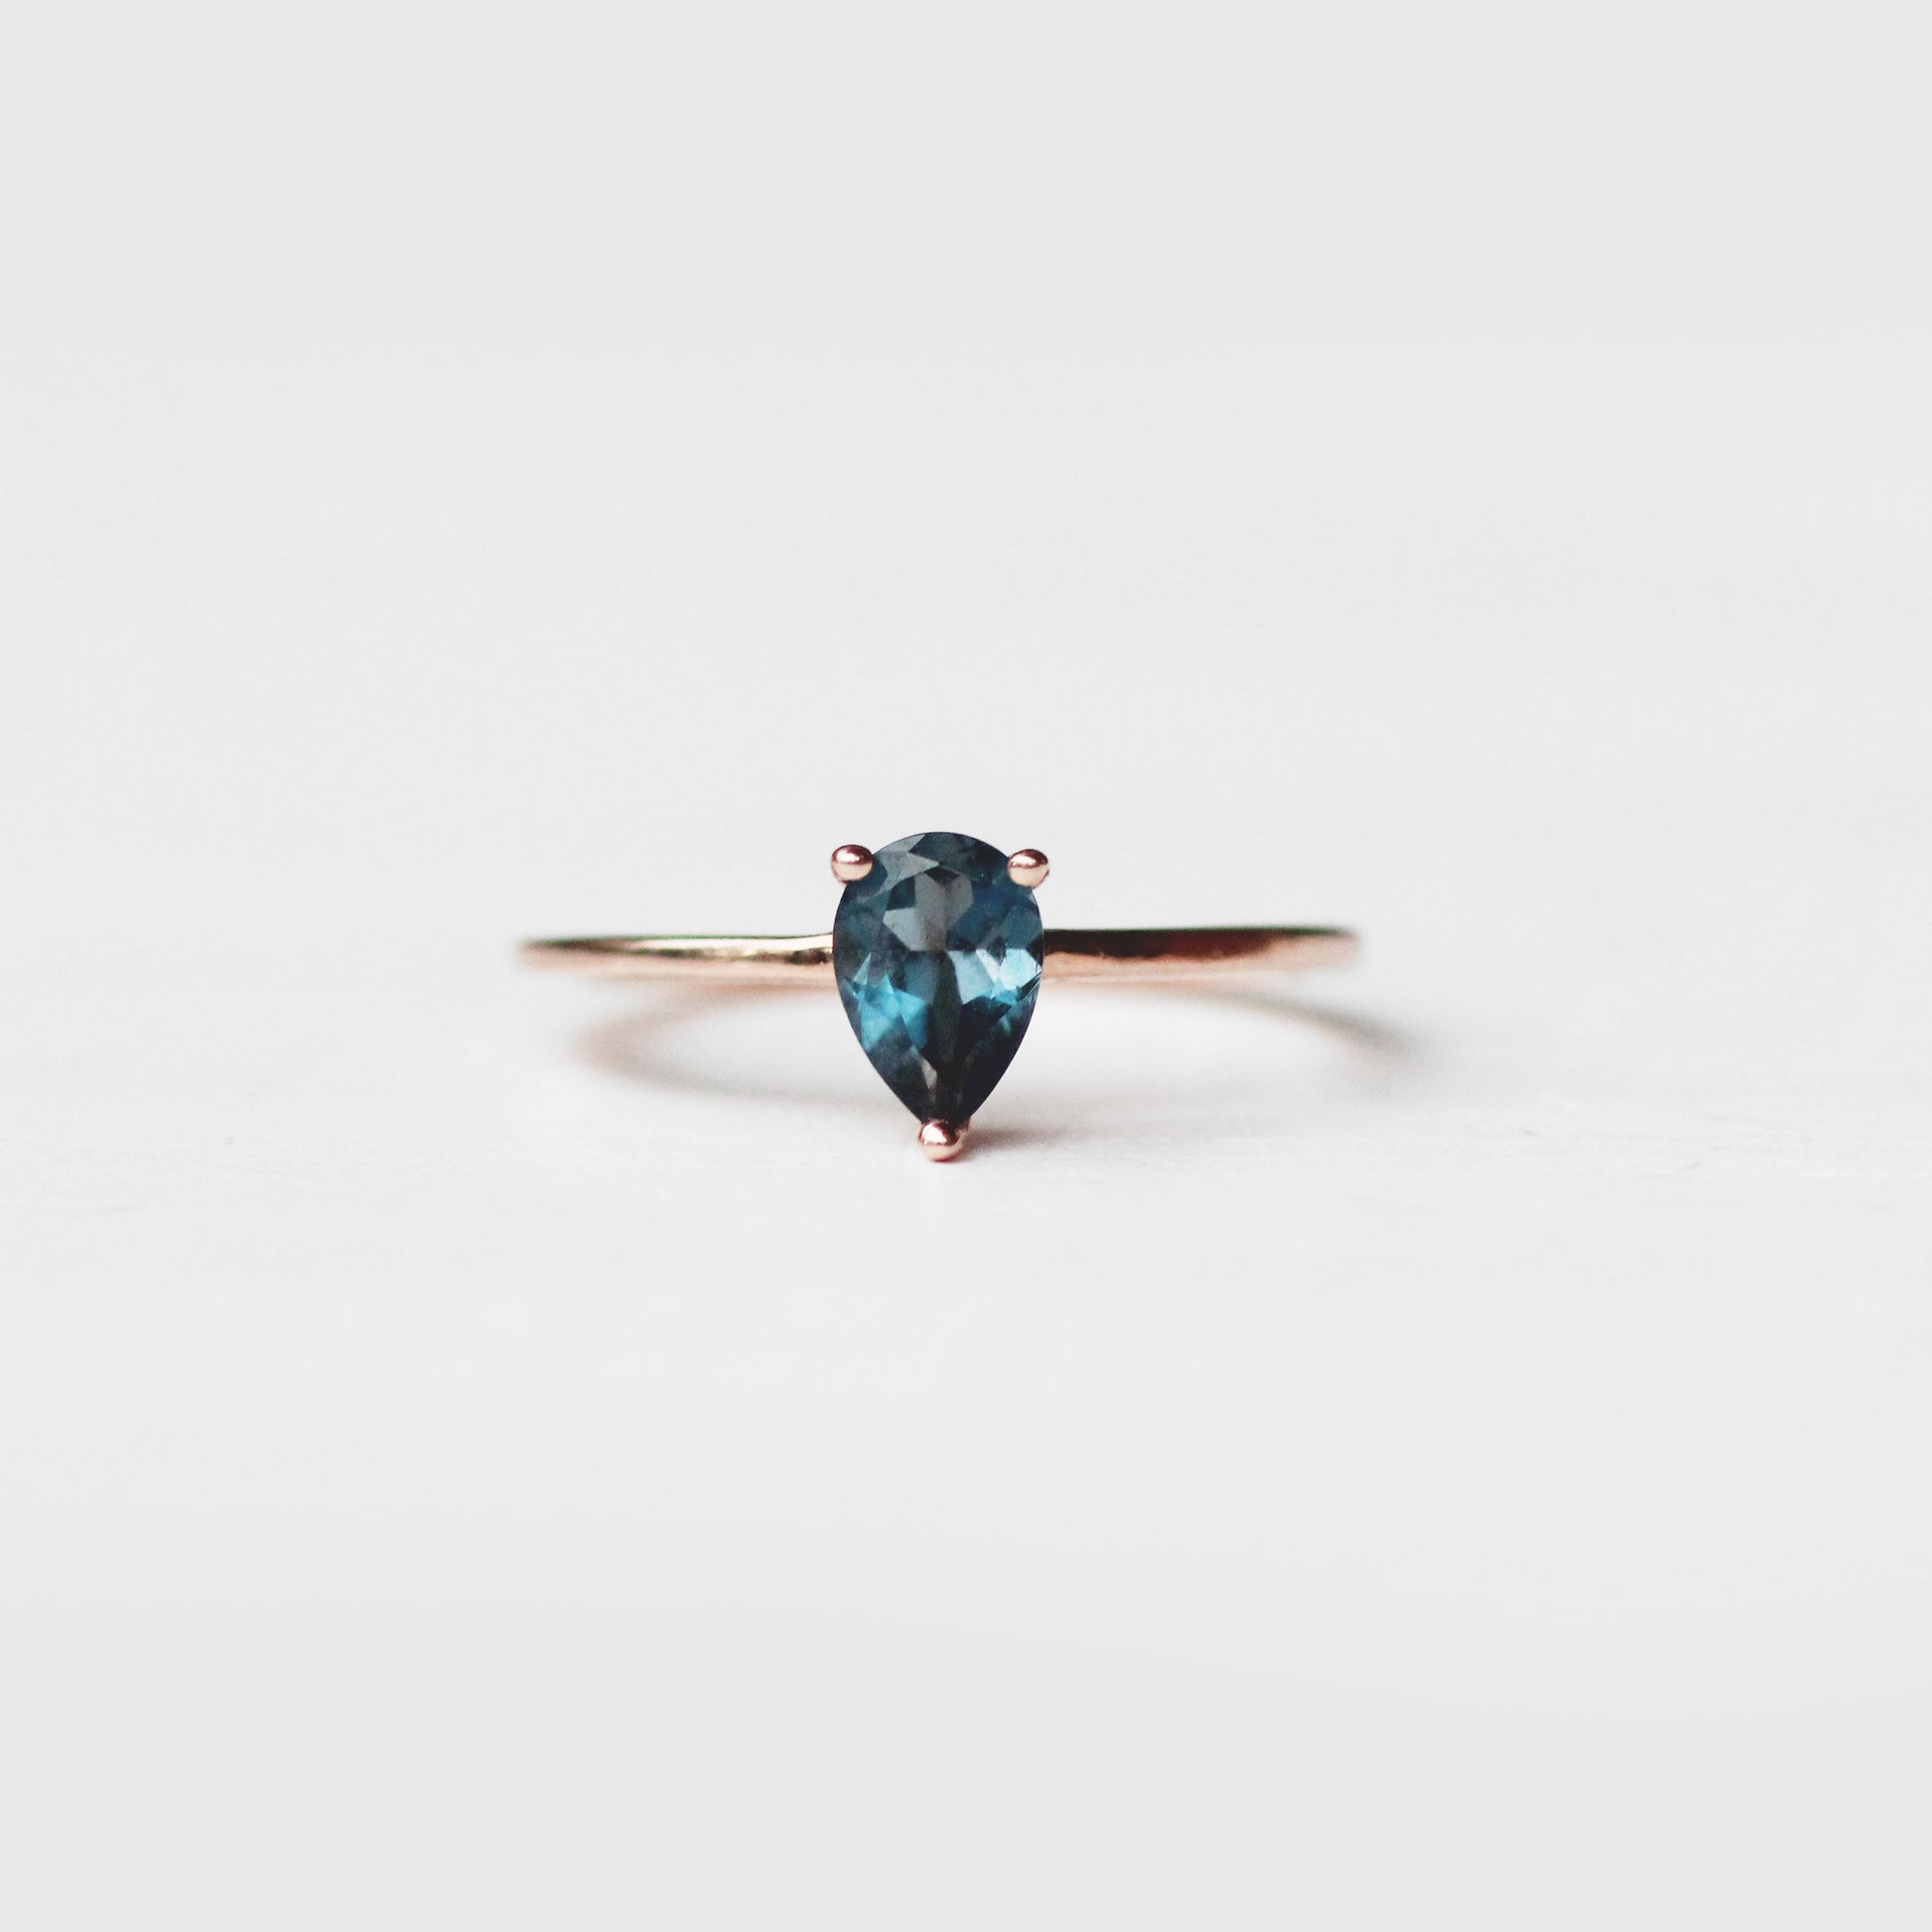 London Blue Topaz .85 carat Pear Cut - Your choice of metal - Custom - Midwinter Co. Alternative Bridal Rings and Modern Fine Jewelry